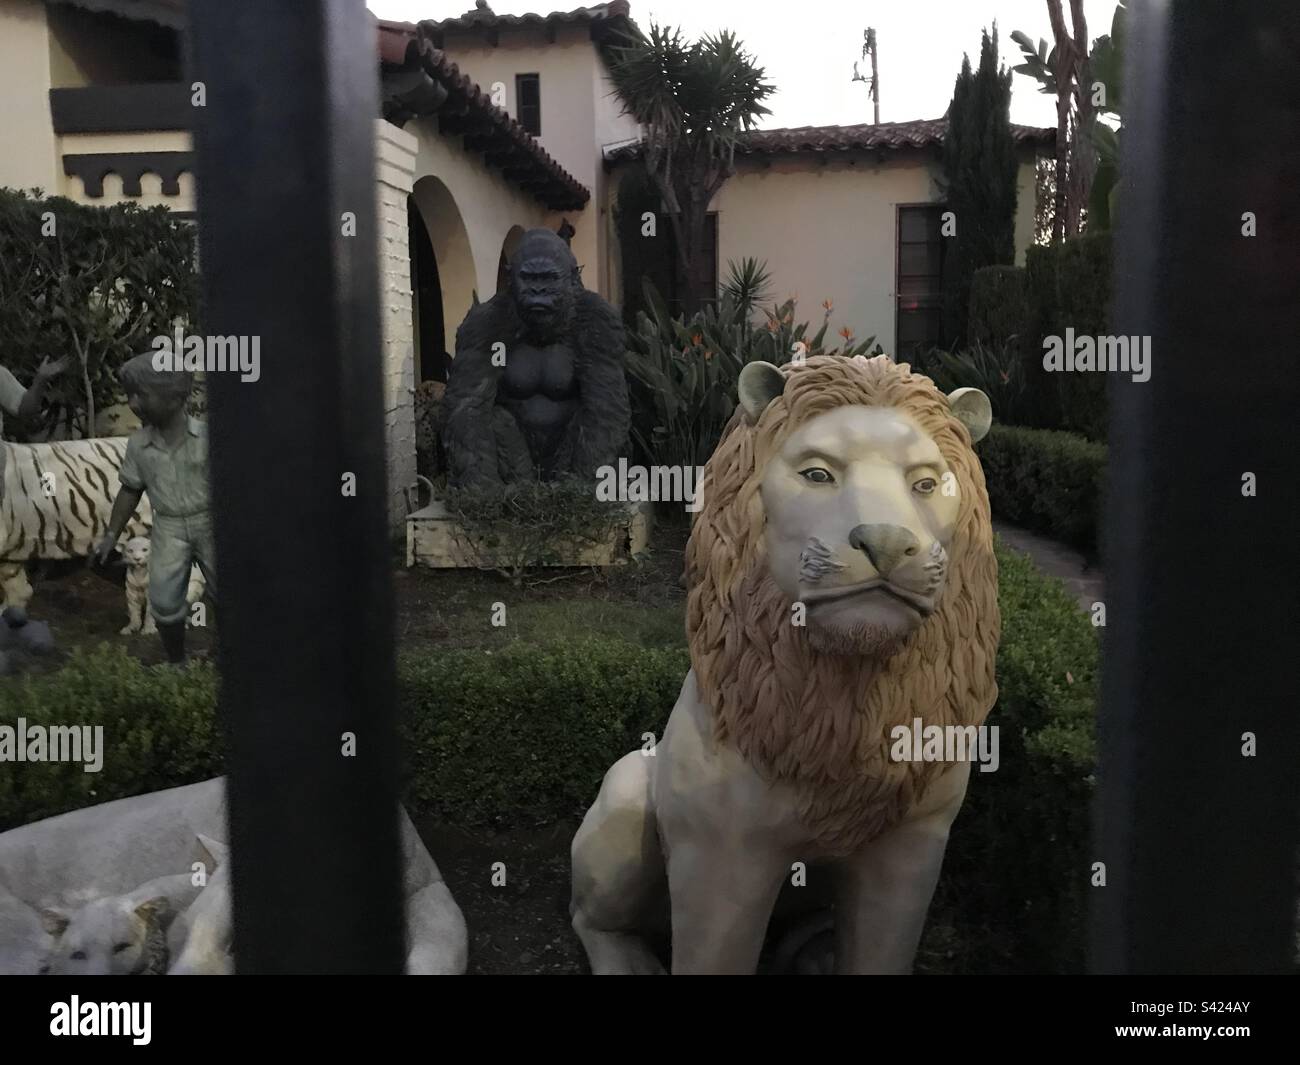 A lion and a gorilla appear to guard this Beverly, California home, but they’re only two of many statues inhabiting the front yard. Stock Photo